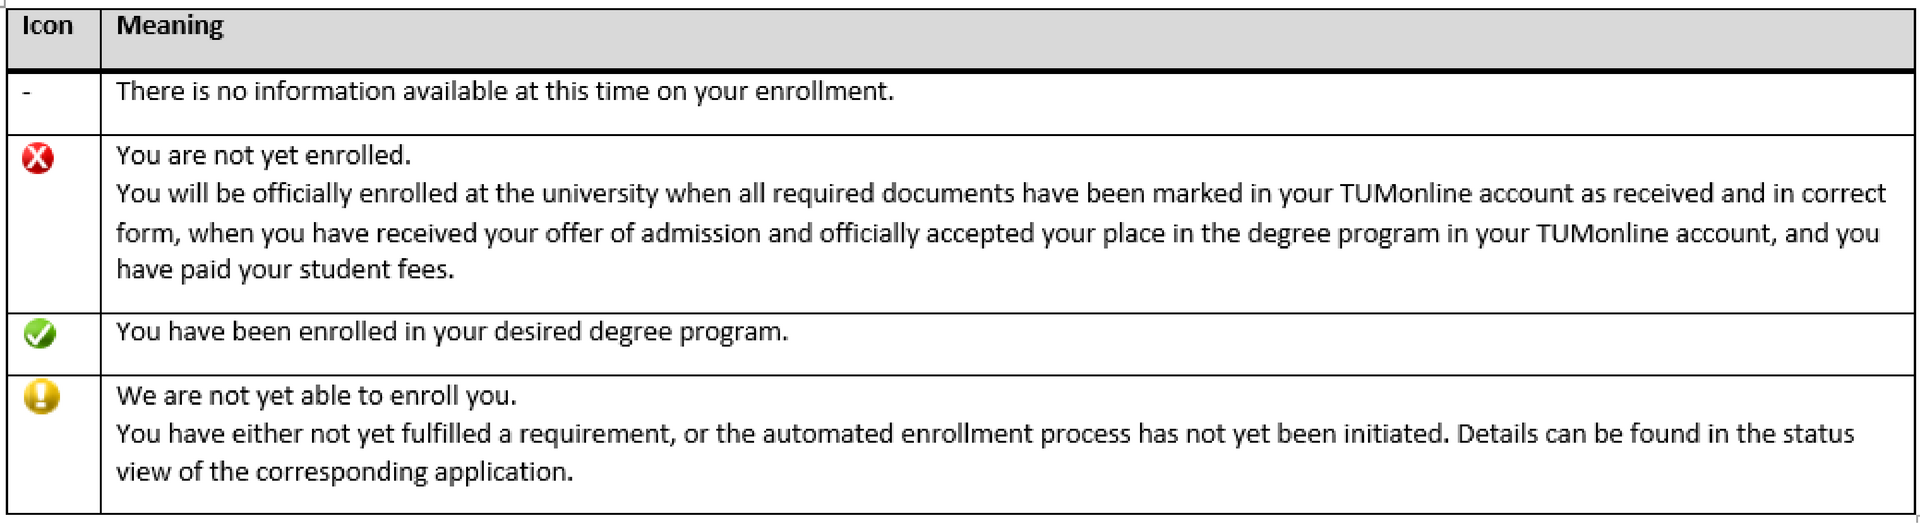 red x: you are not enrolled. green hook: you are enrolled. yellow exclamation mark: you cannot be enrolled yet, please check the details of the application